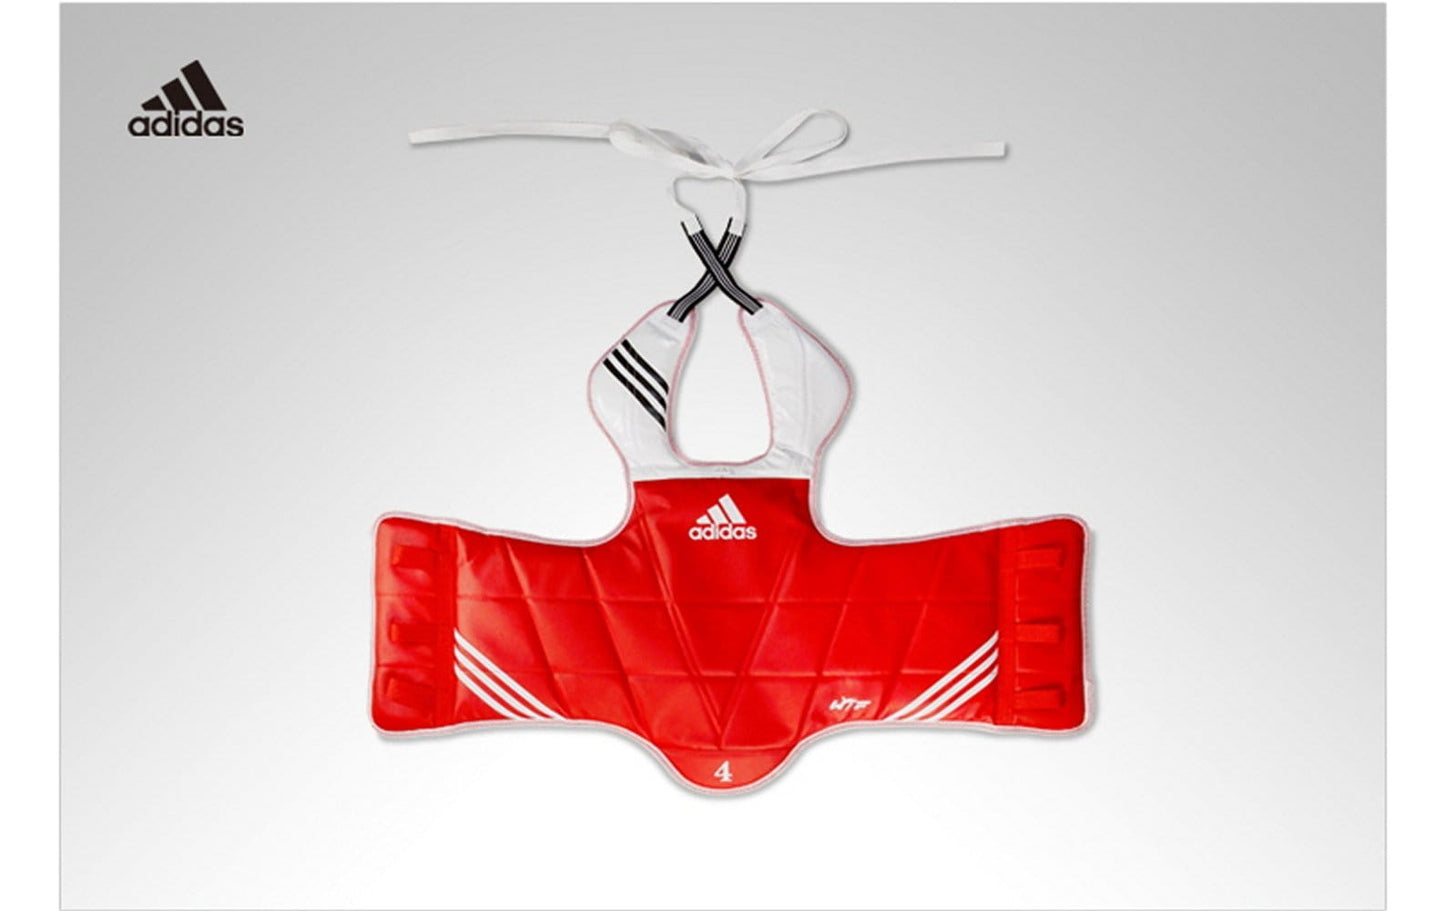 Adidas sporting goods ADIDAS NEW BODY PROTECTOR WTF approved